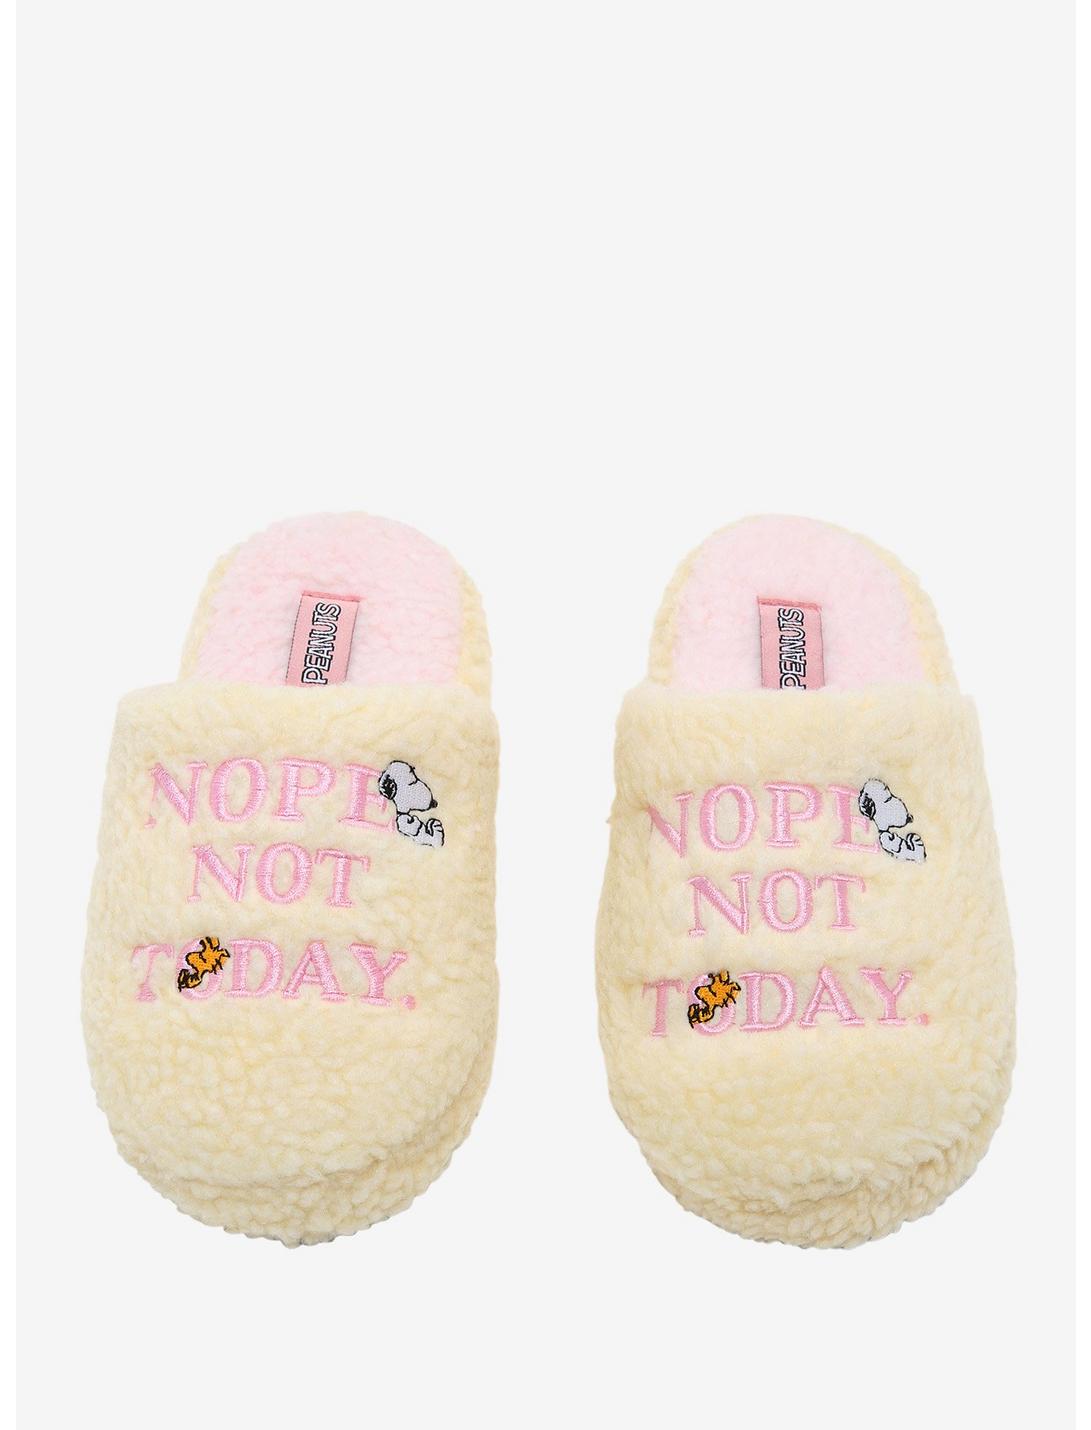 Peanuts Nope, Not Today Plush Slippers, MULTI, hi-res